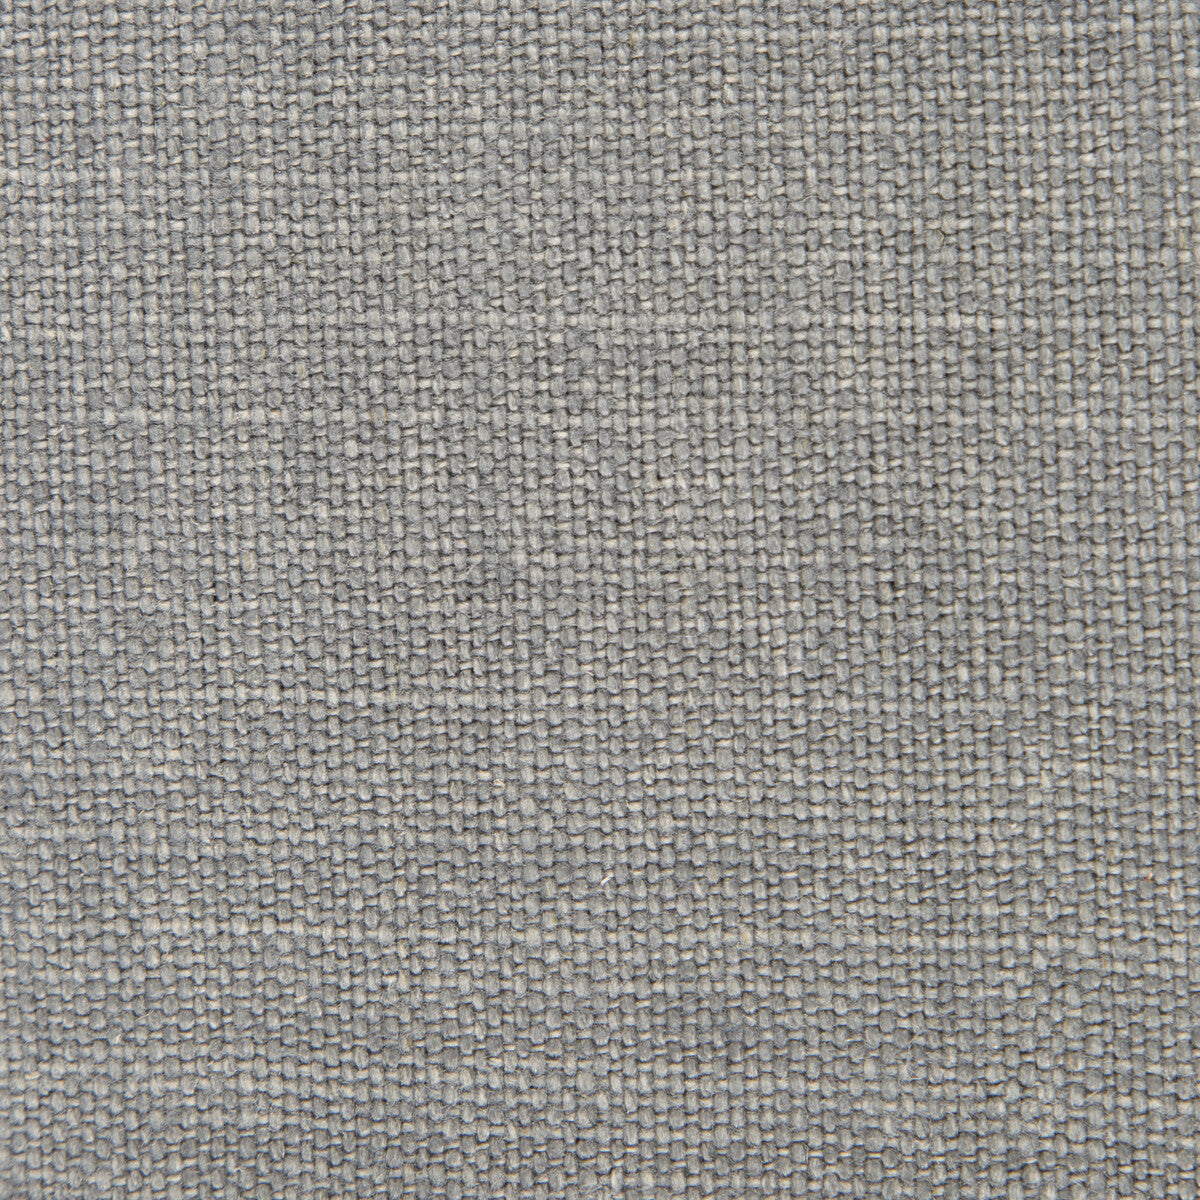 Nicaragua fabric in gris color - pattern GDT5239.017.0 - by Gaston y Daniela in the Basics collection